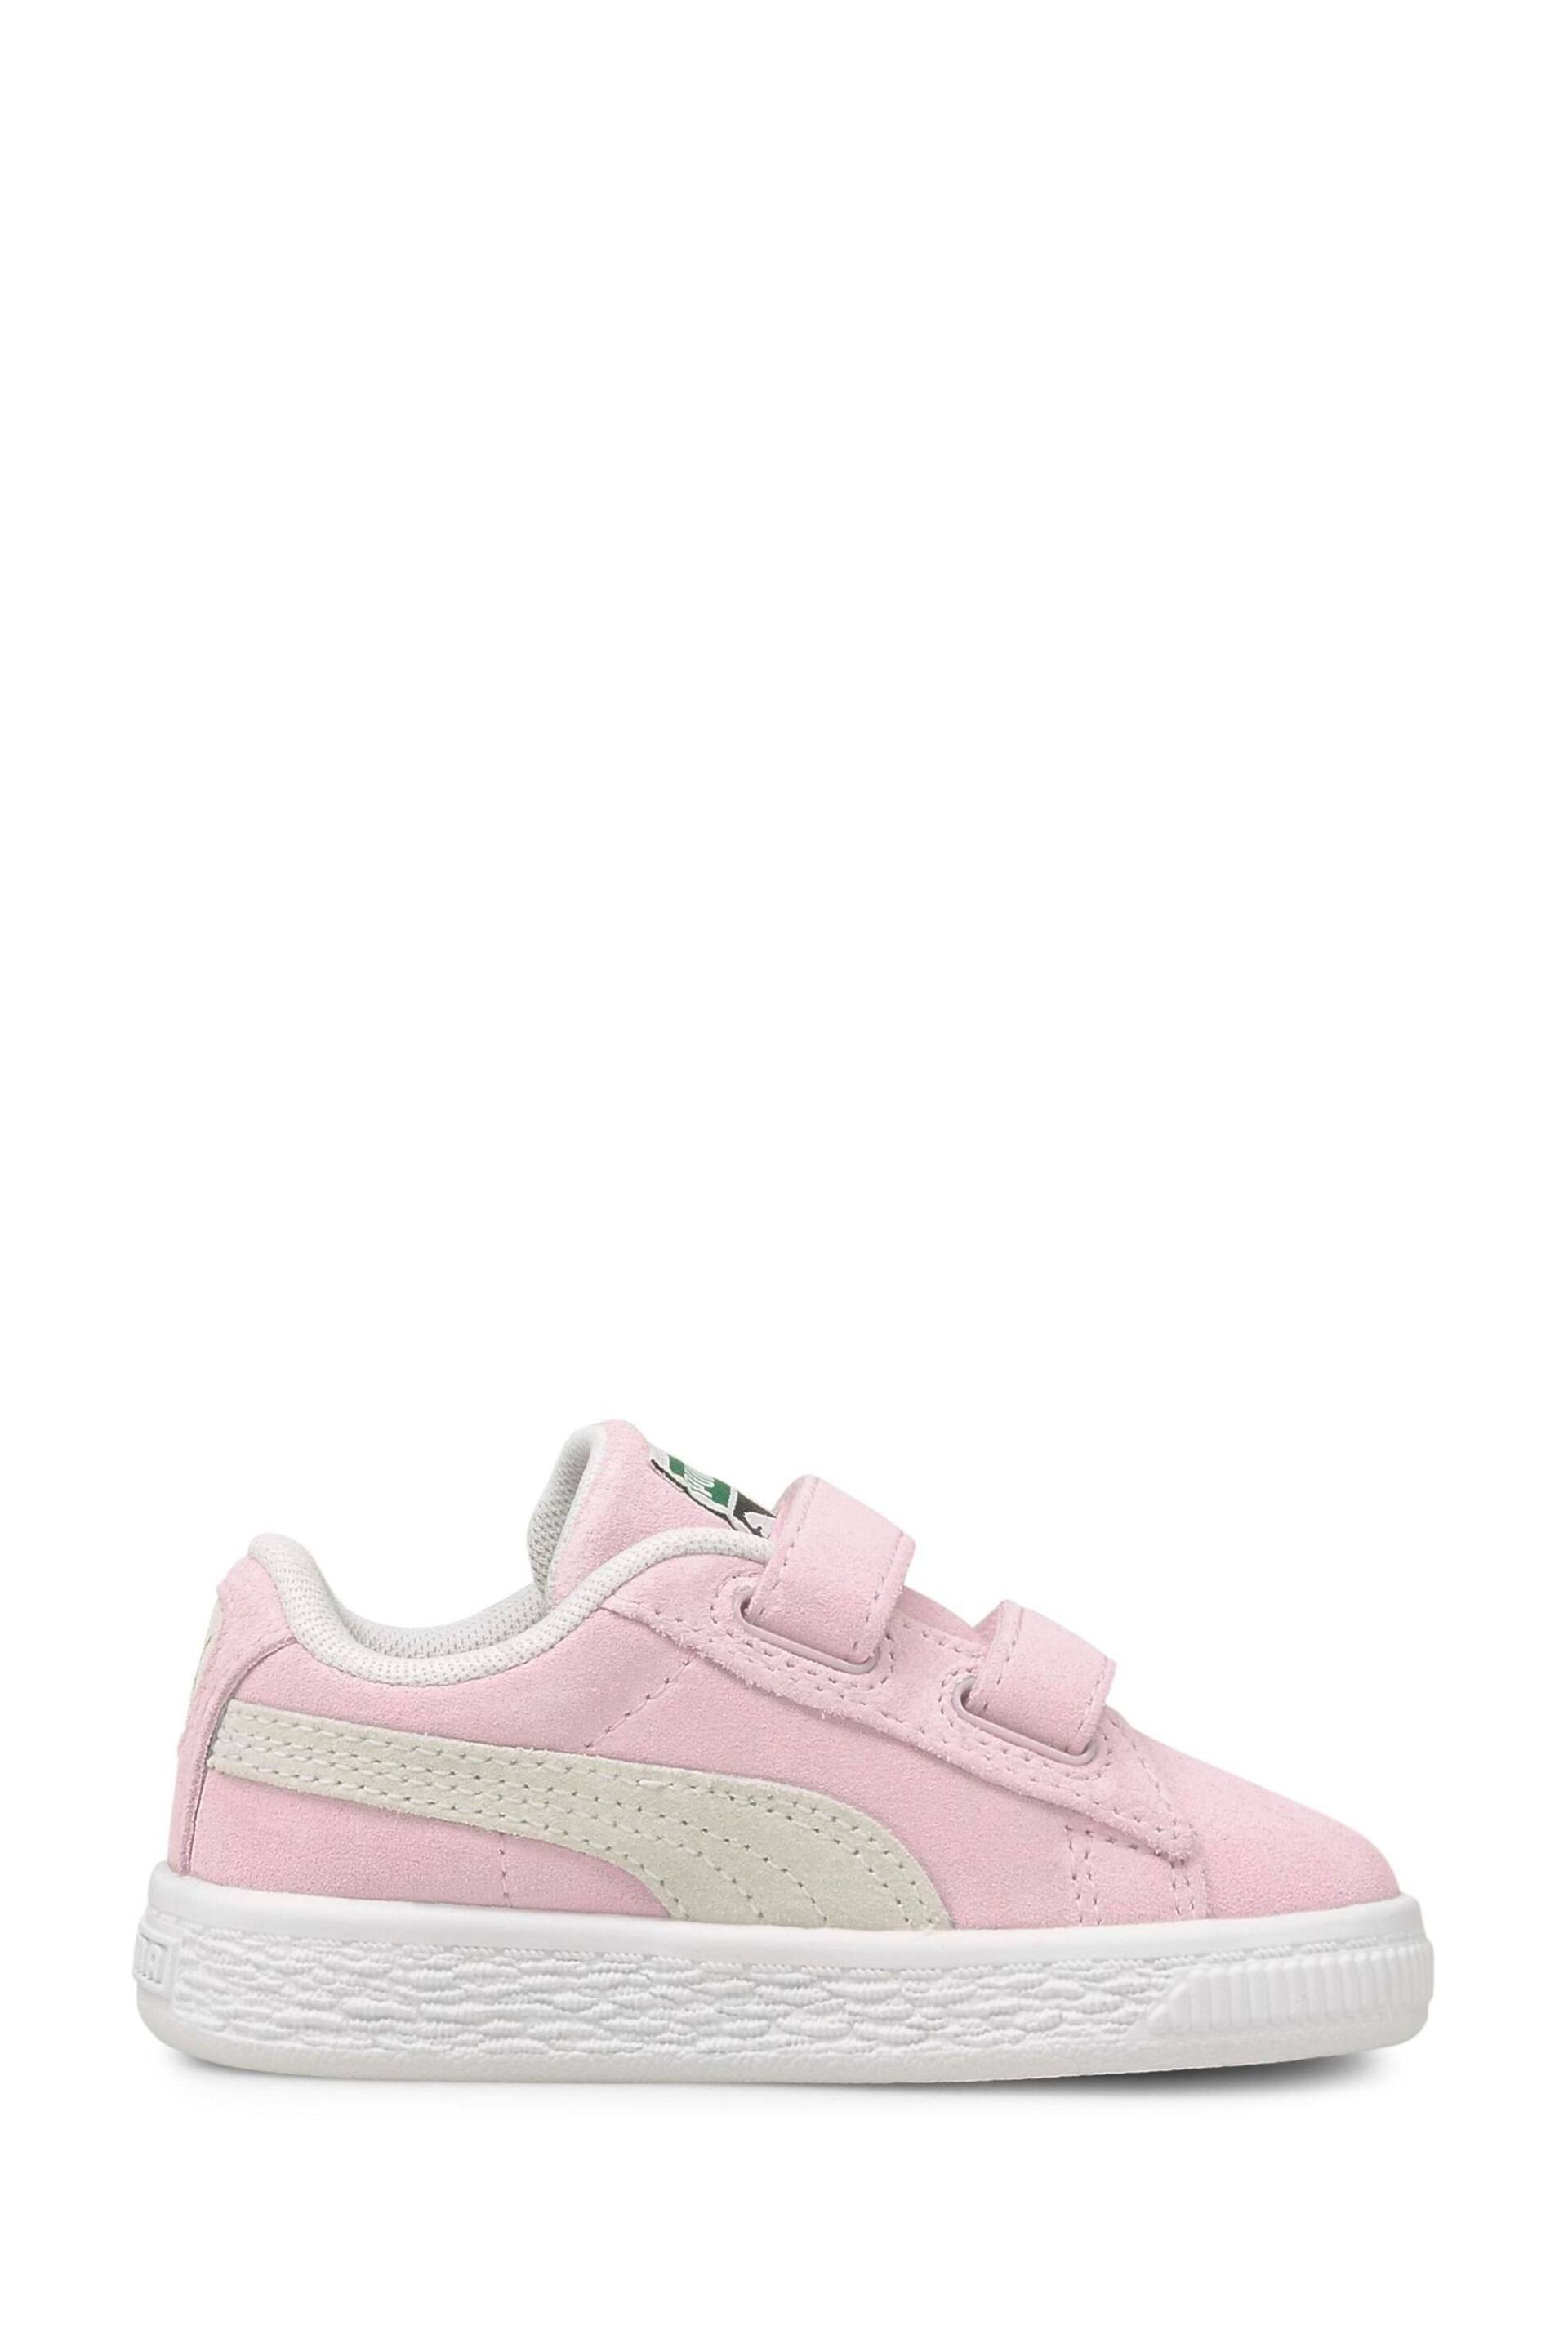 Puma Pink Babies Suede Classic XXI Trainers - Image 1 of 5